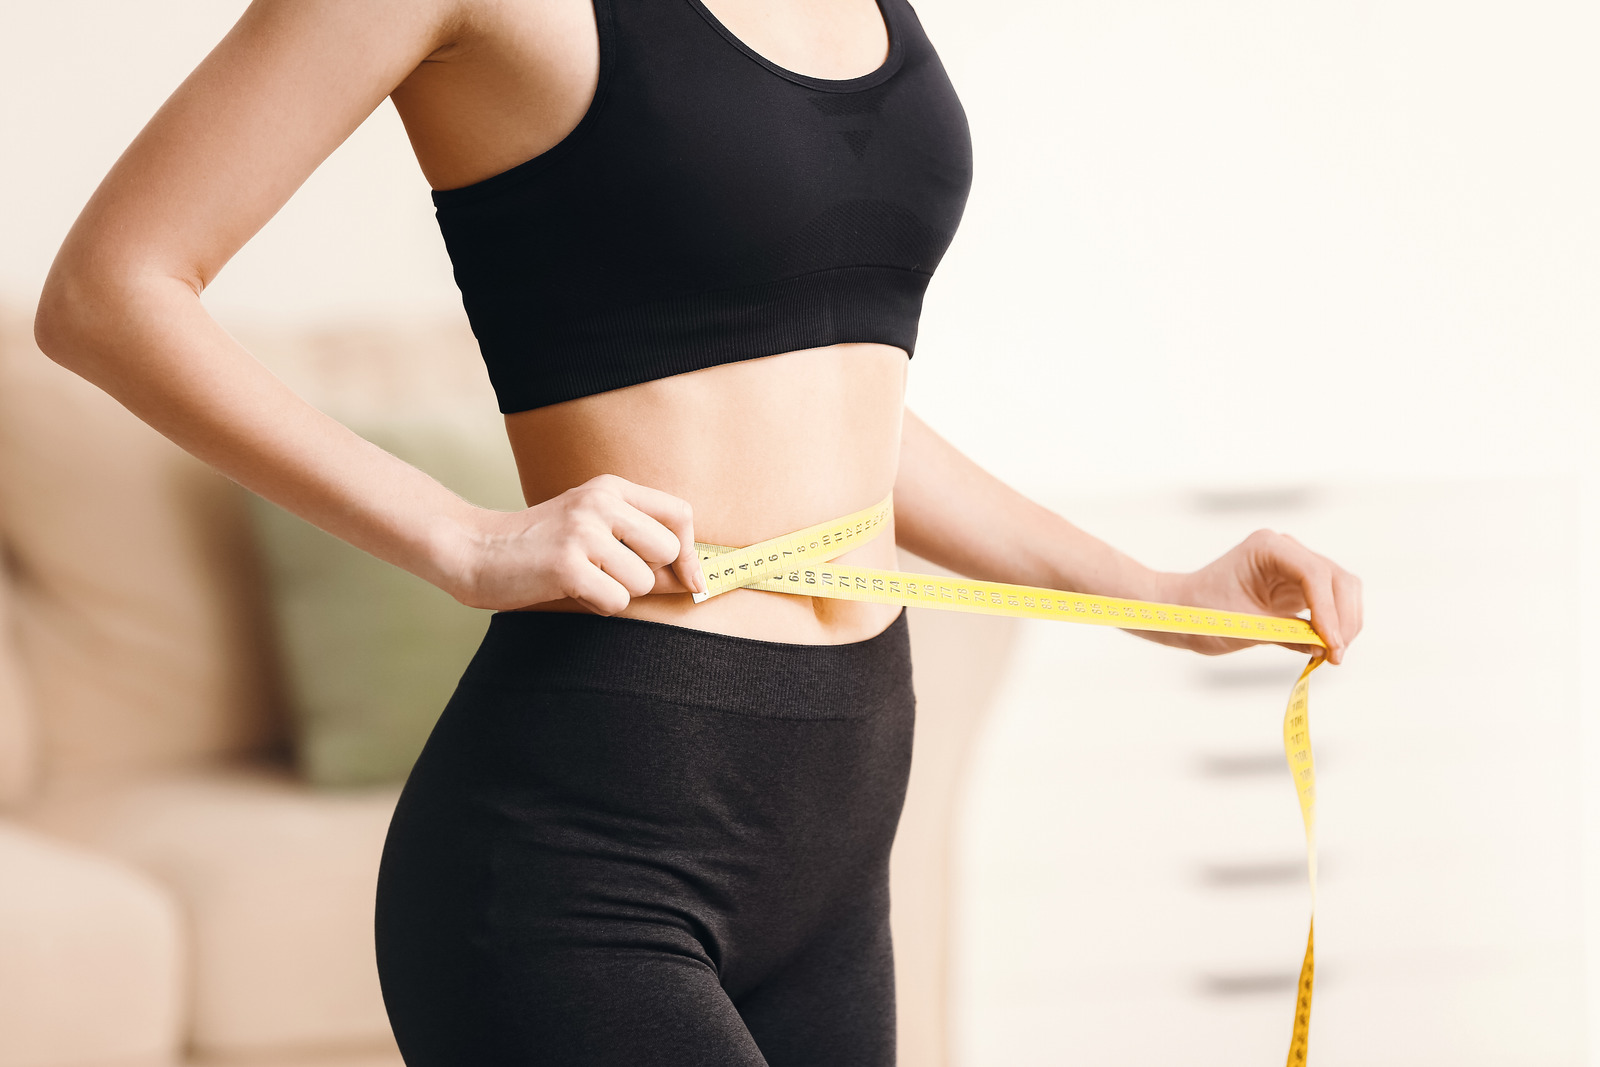 Does Topamax Cause Weight Loss? - PaperJaper